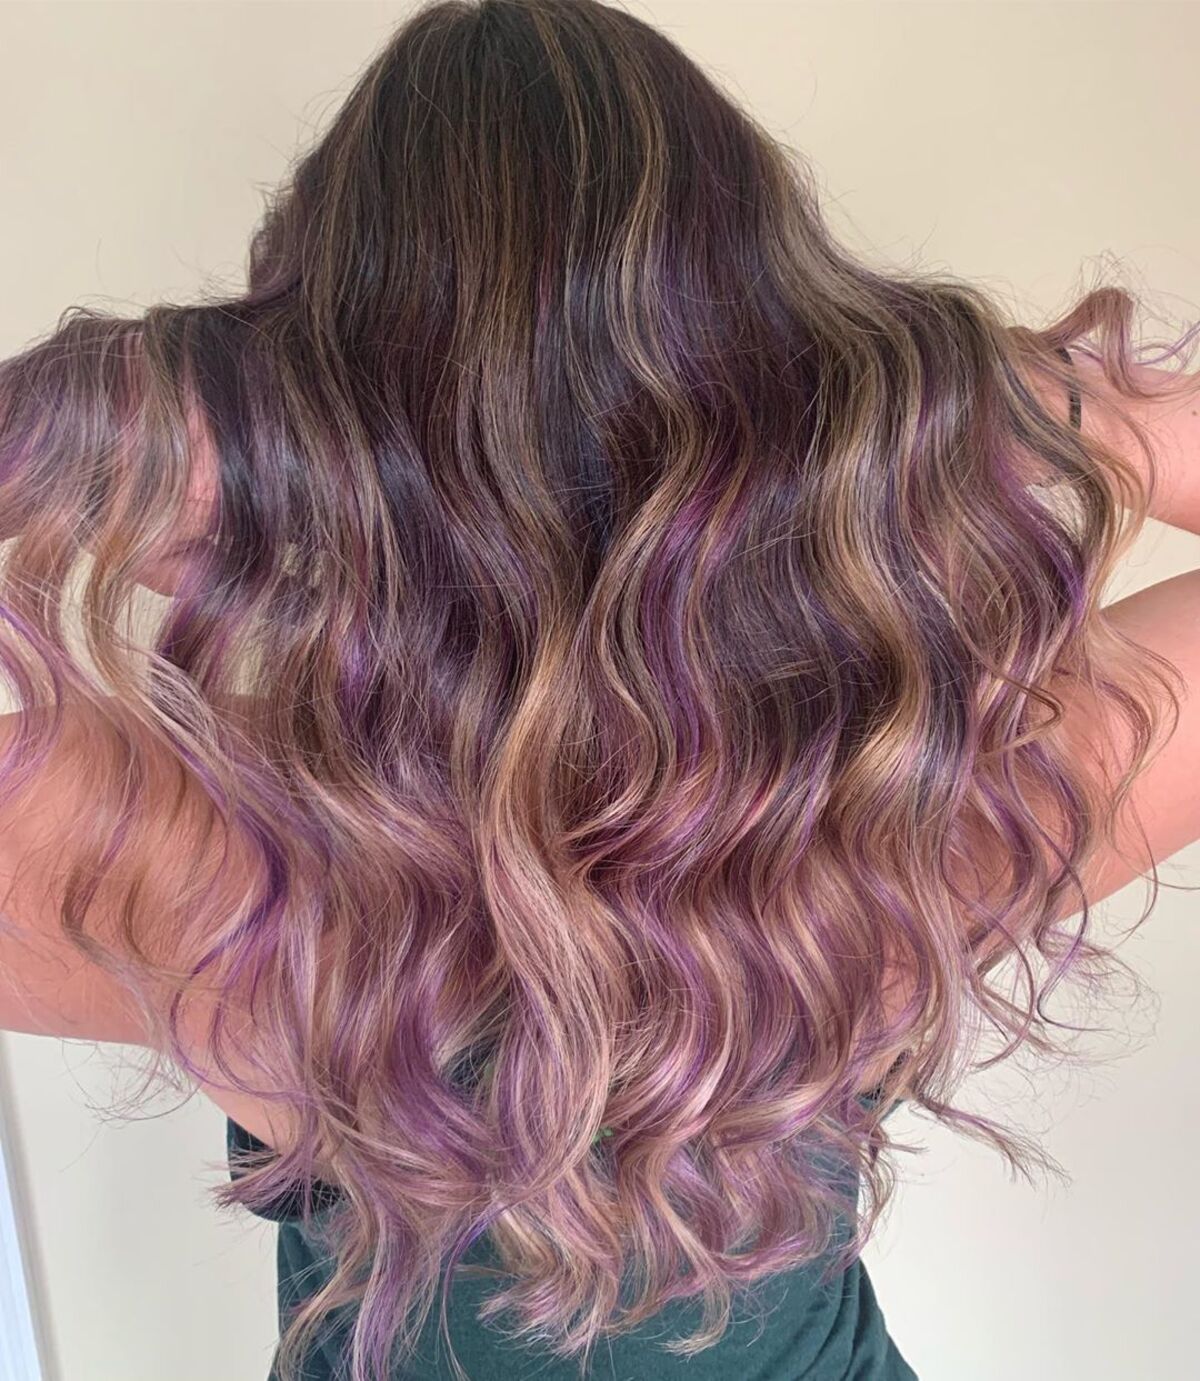 Purple with Lighter Blonde Highlights